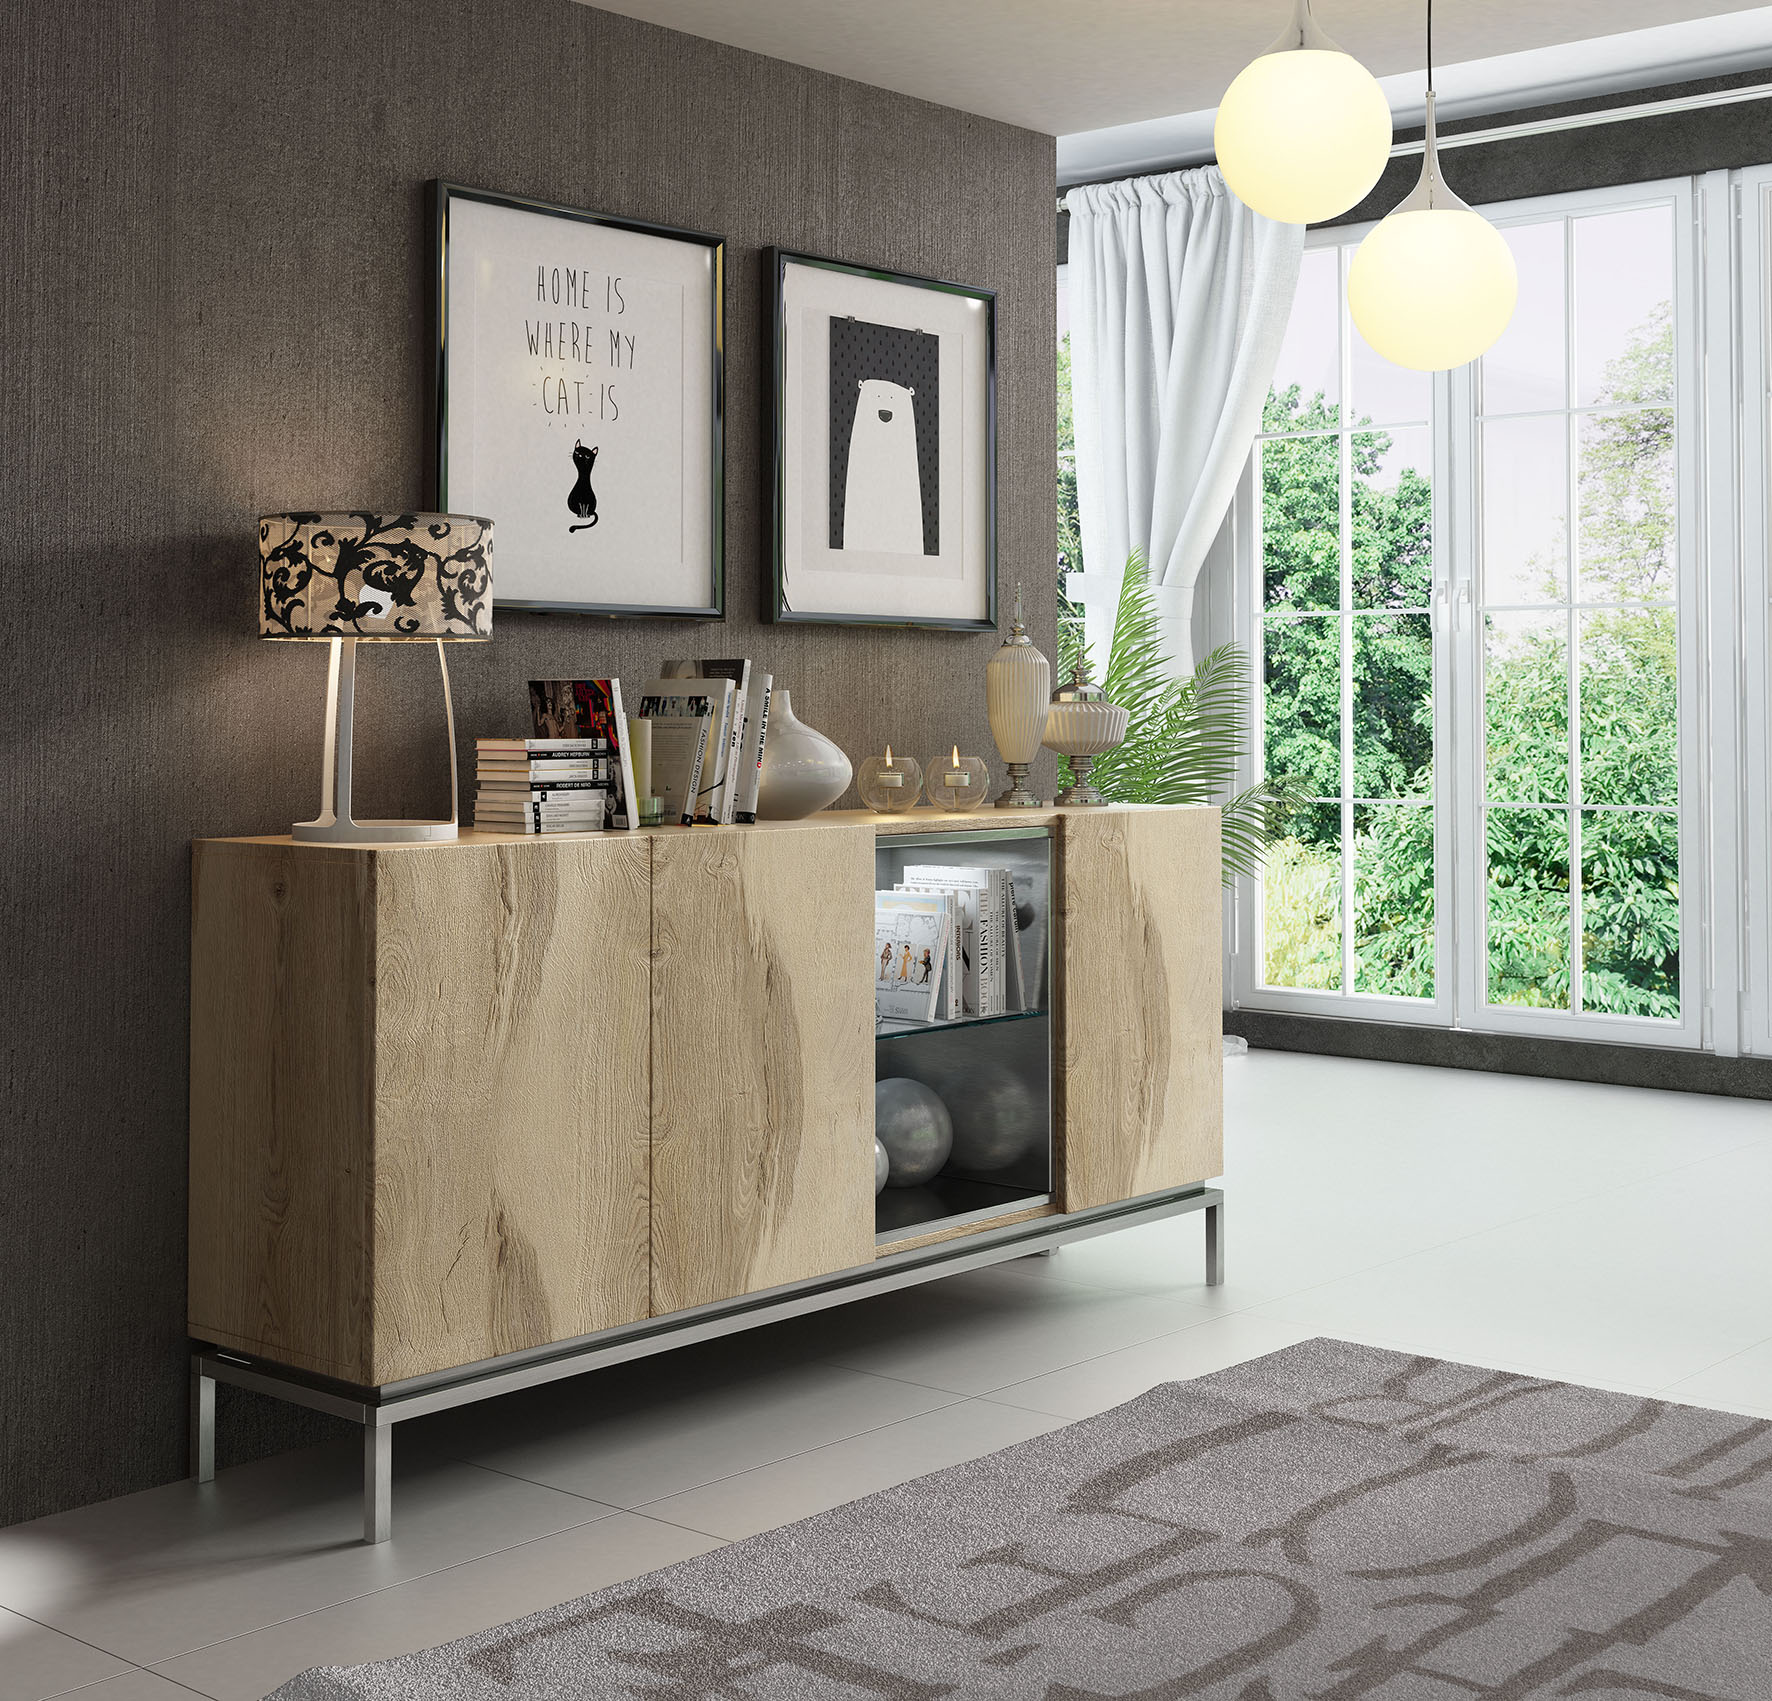 Brands Franco Kora Dining and Wall Units, Spain AII.29 Sideboard